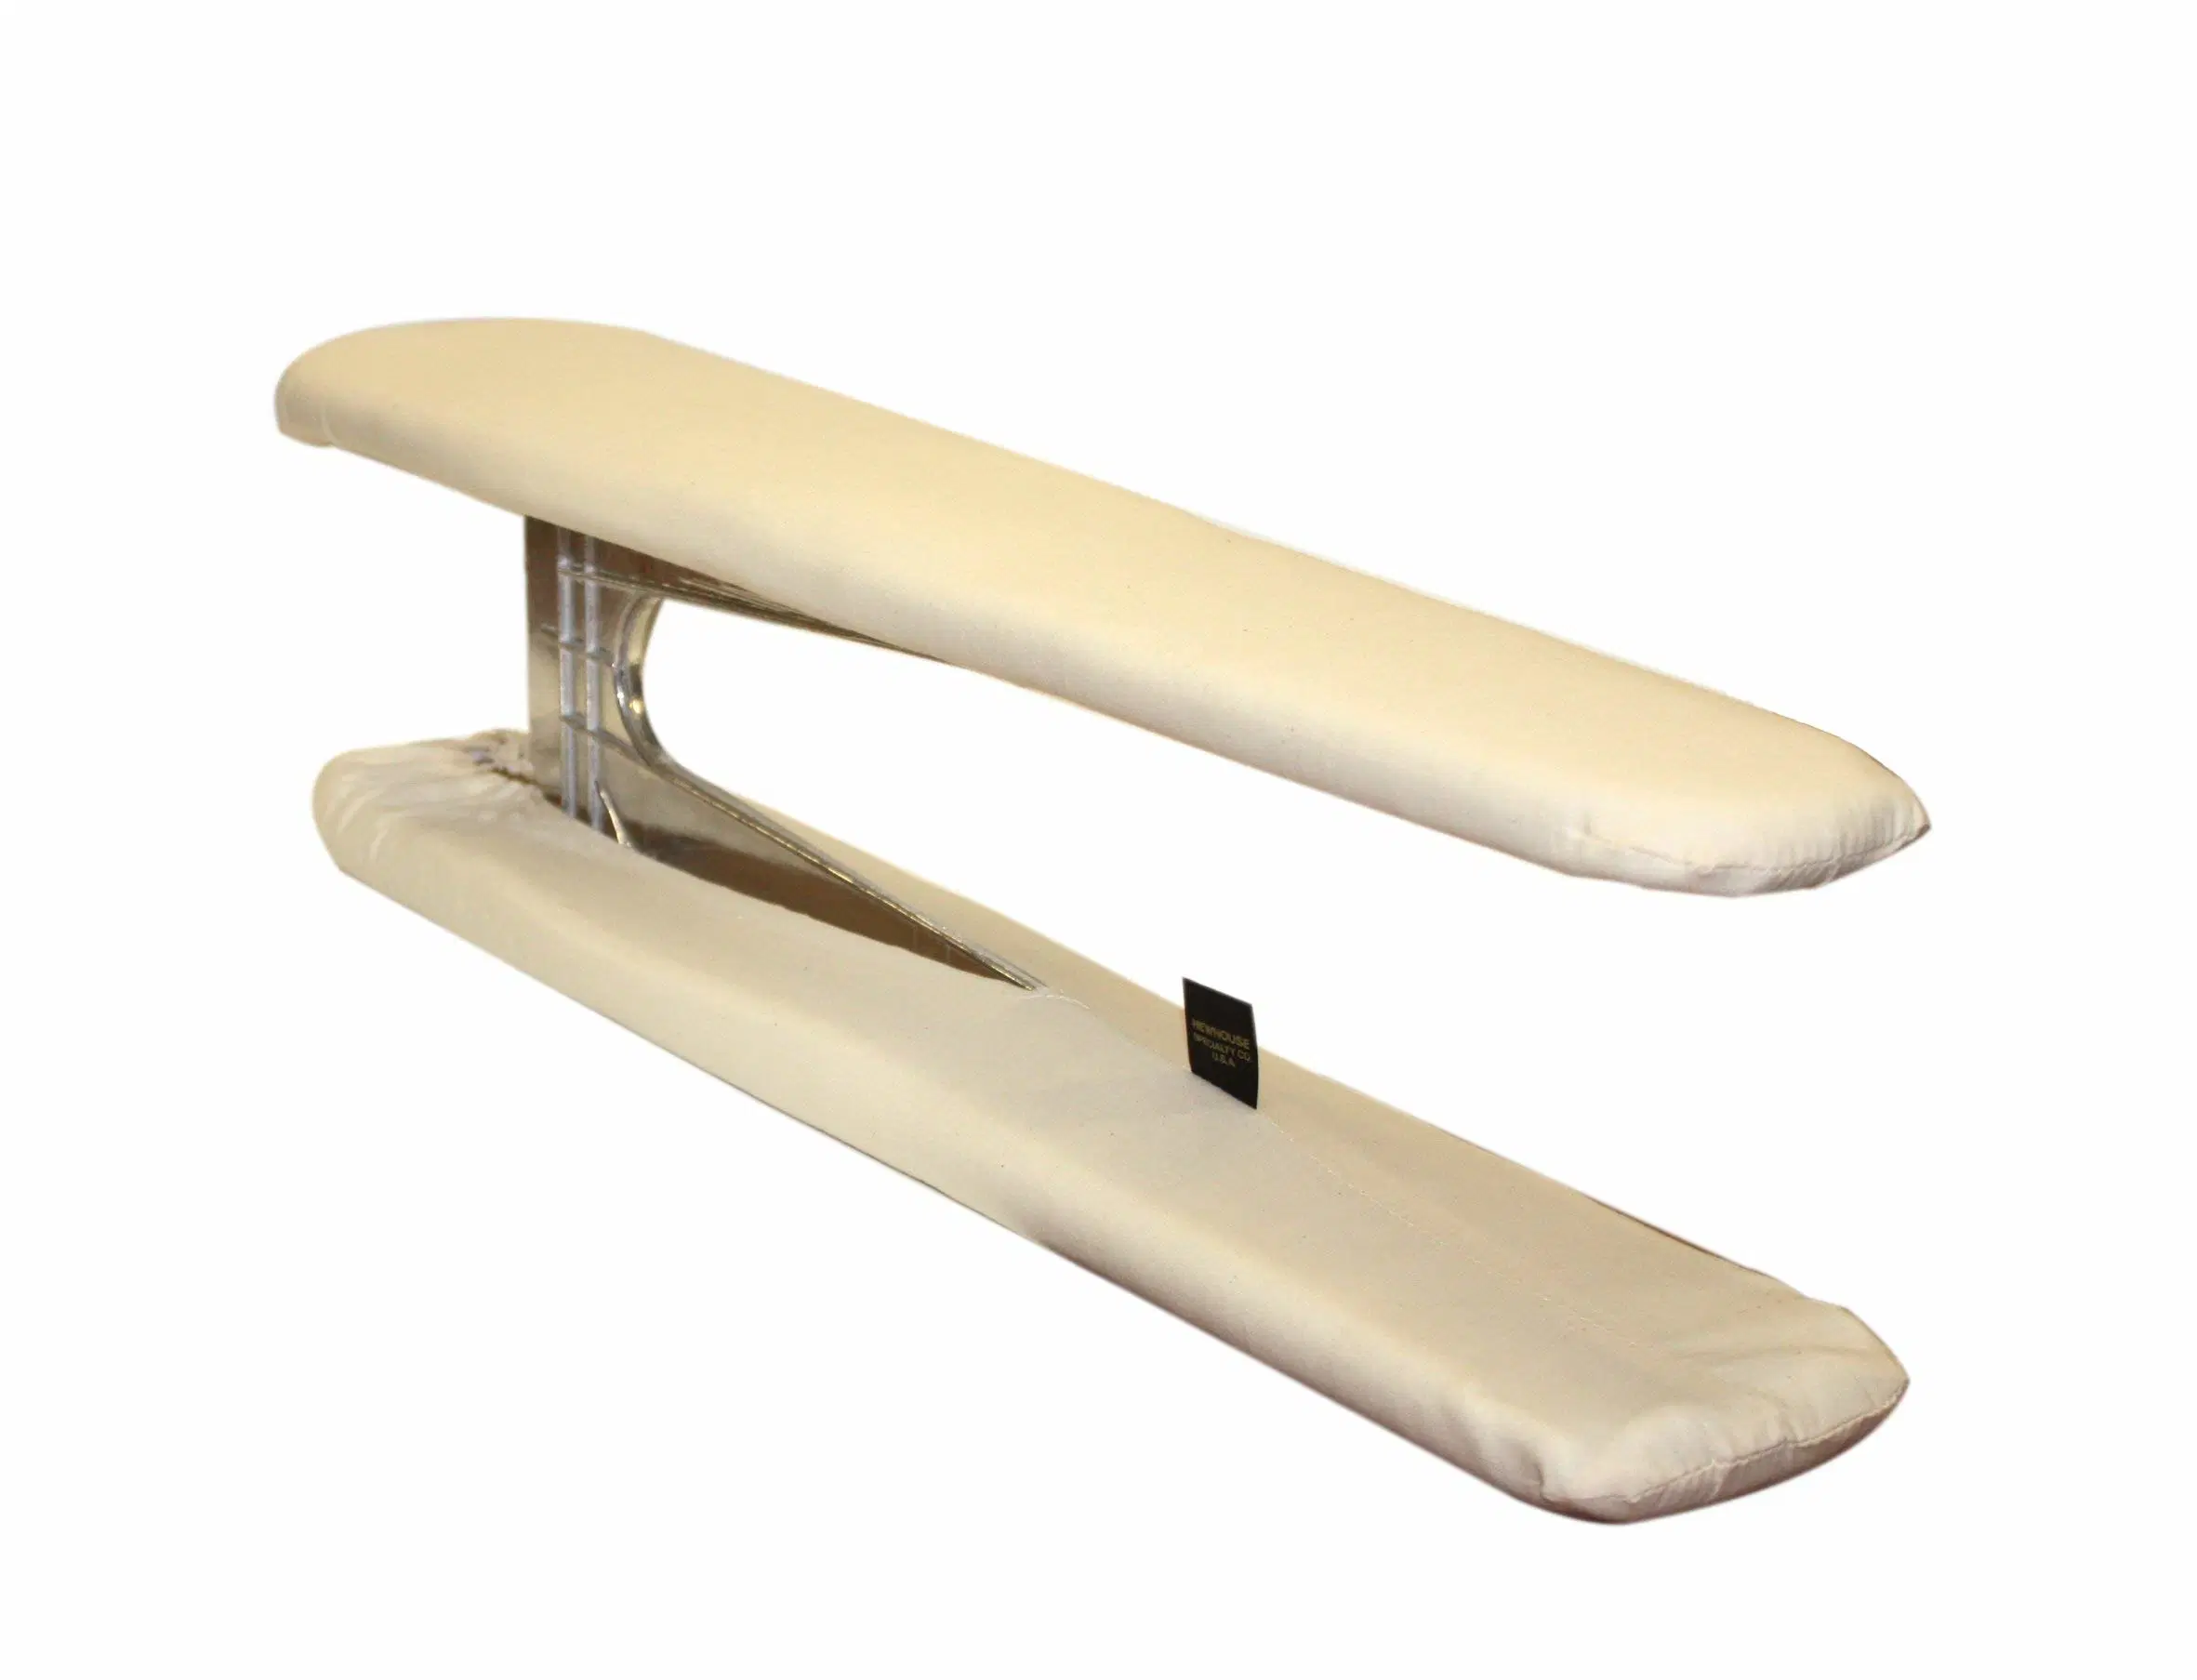 Specialty Padded Sleeve Ironing Board with Heat Resistant Cover for Delicate Garments